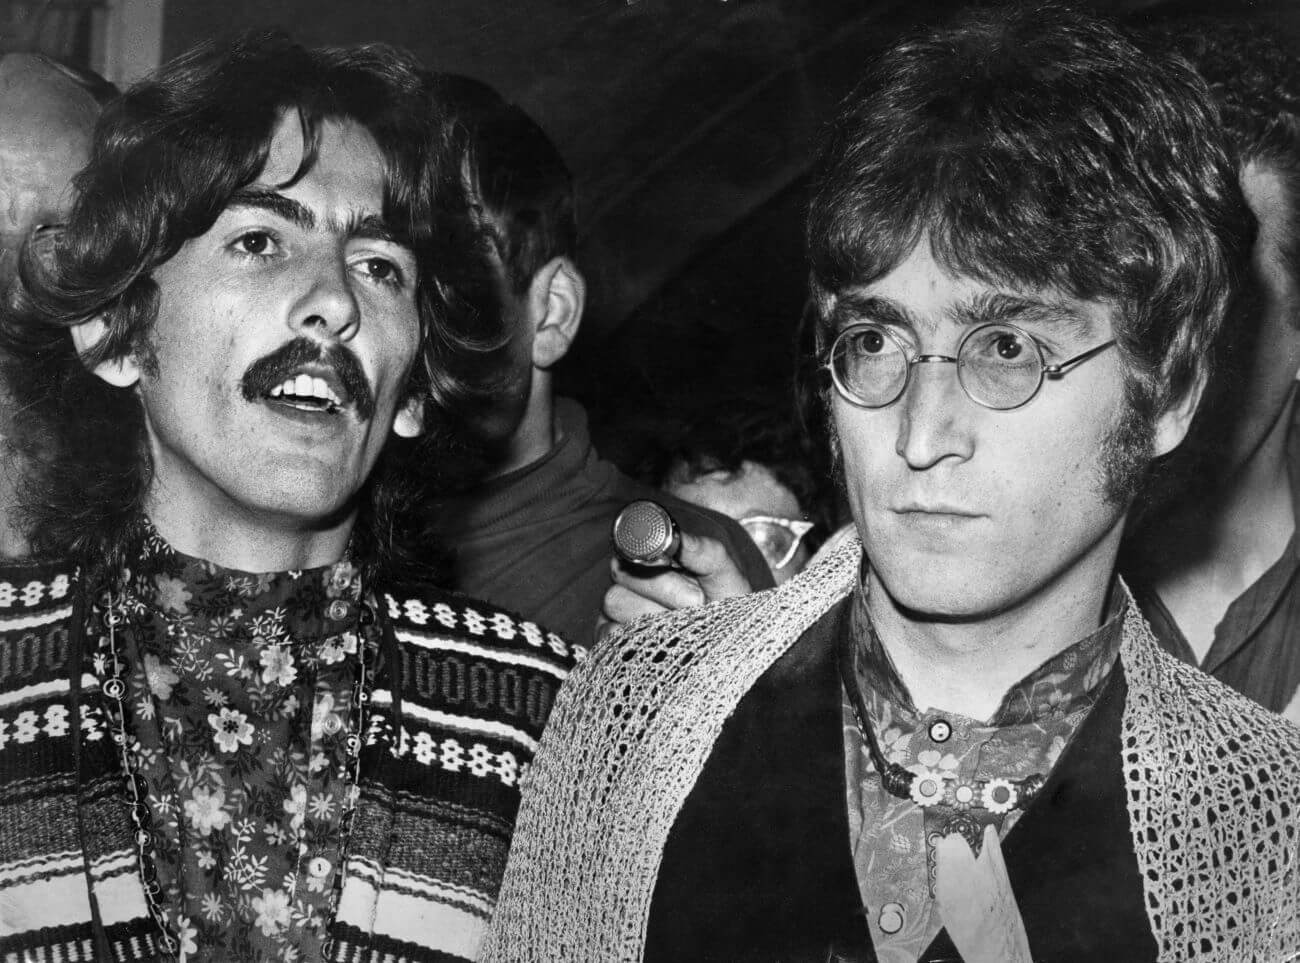 A black and white picture of George Harrison and John Lennon walking together through a crowd.